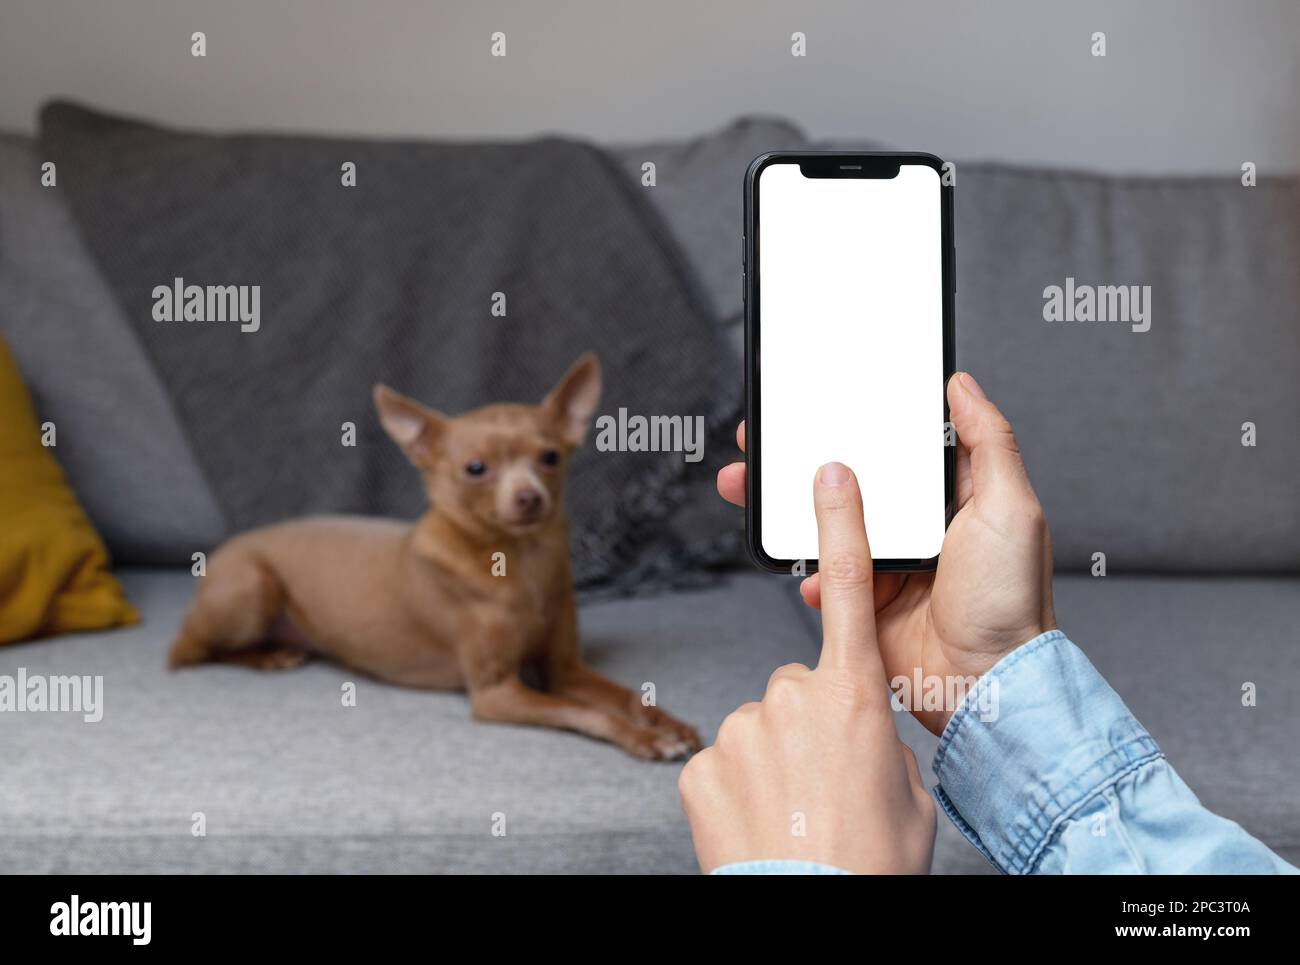 Mobile app for pets owner, blank screen of mobile phone with touch screen and dog in background. Stock Photo